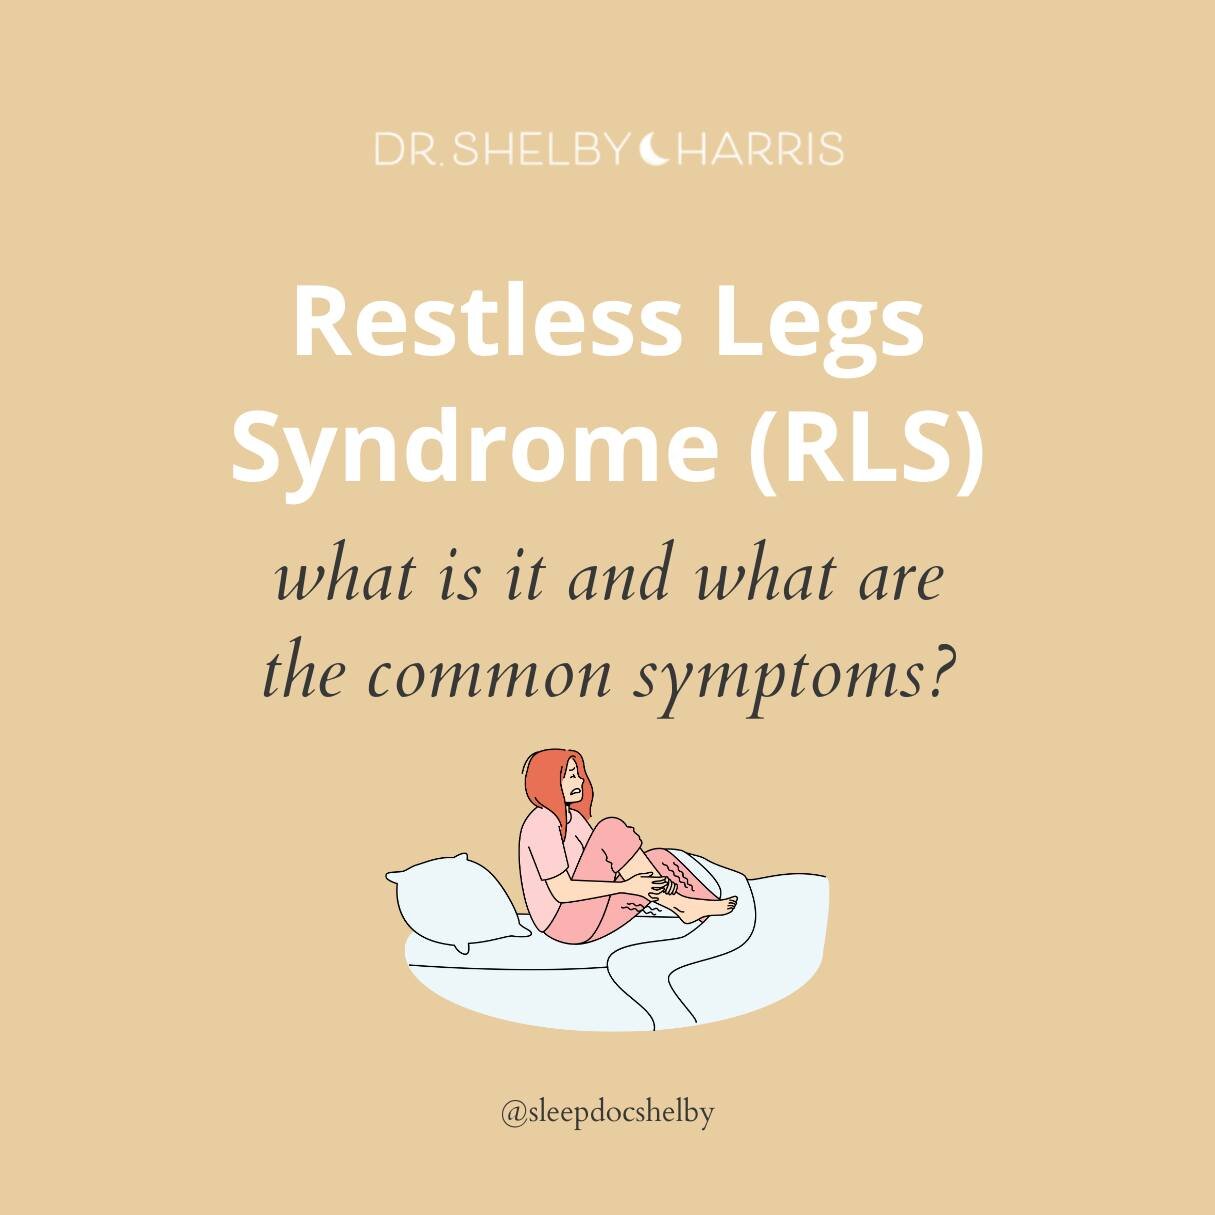 👉 Swipe right to learn what Restless Legs Syndrome is, its symptoms, and how it can be addressed.

Restless Legs Syndrome (RLS), also known as Willis-Ekbom Disease, is a condition that is often mistakenly diagnosed as growing pains in children.

Do 